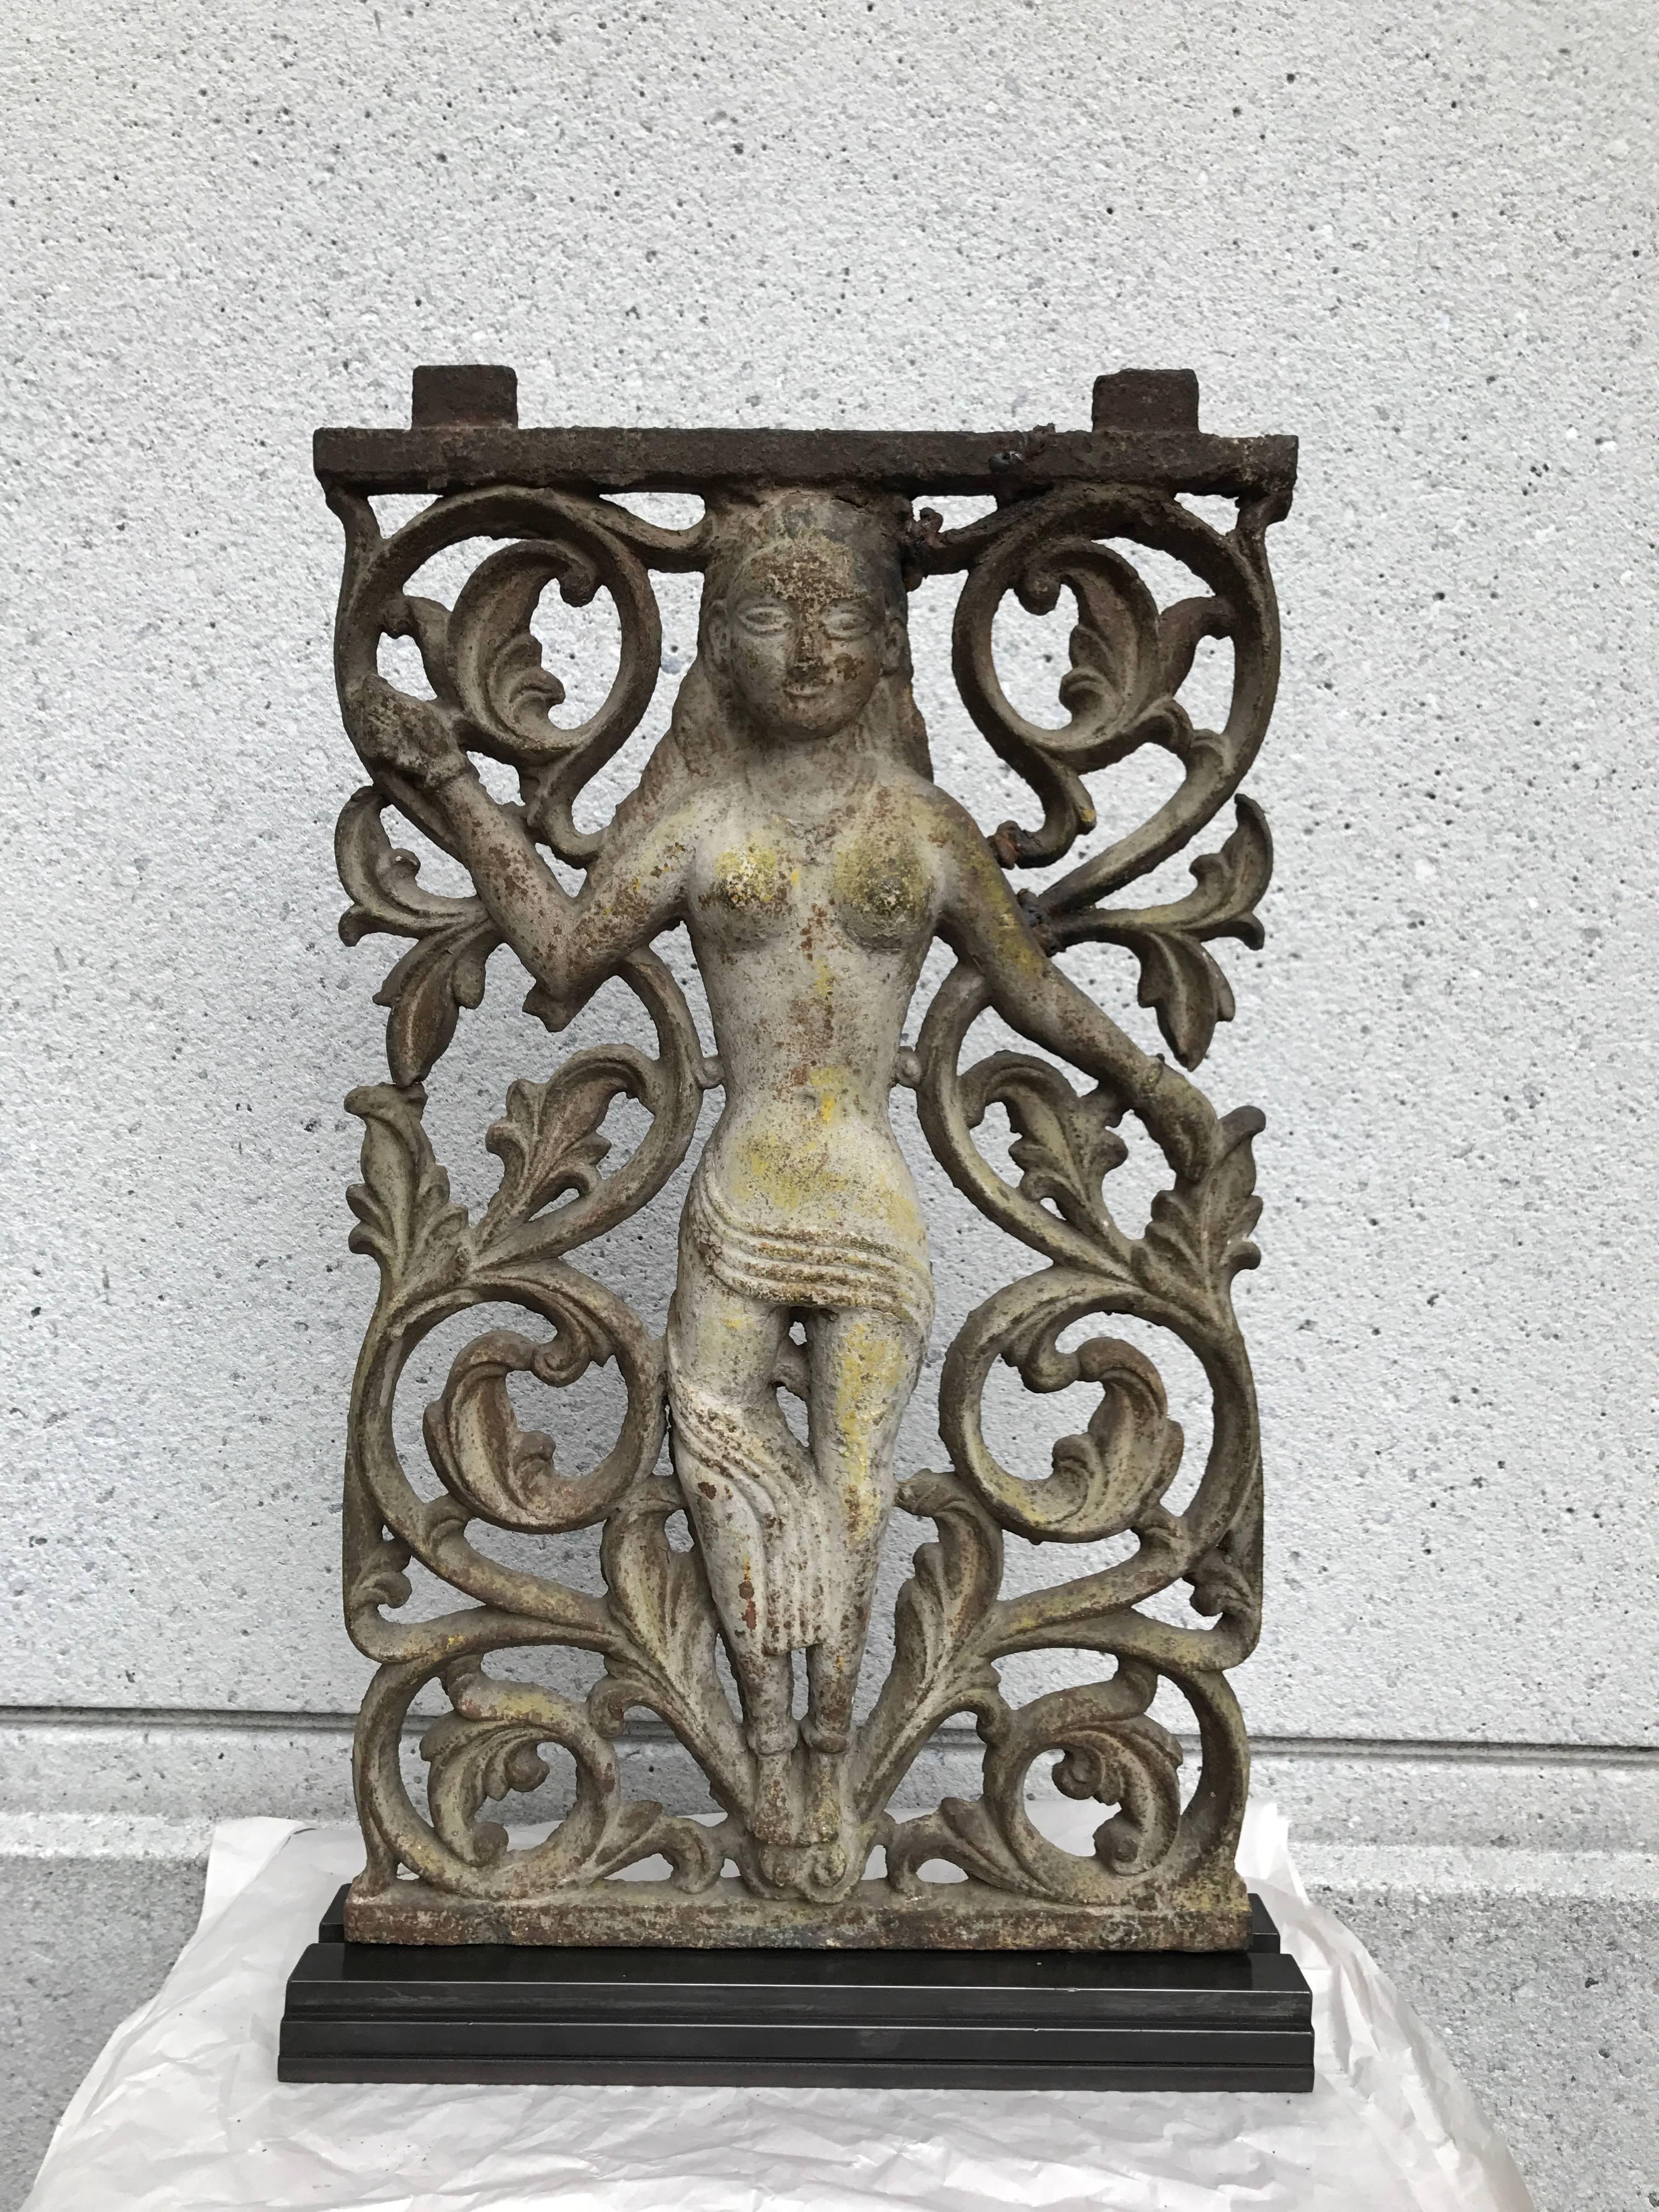 Pair of Anglo-Indian cast iron architectural panels now mounted in iron bases. Depicting a Hindu Goddess standing against a floral background. The panels can be removed from the bases. Traces of original paint.

Can be sold individually $1800 each.